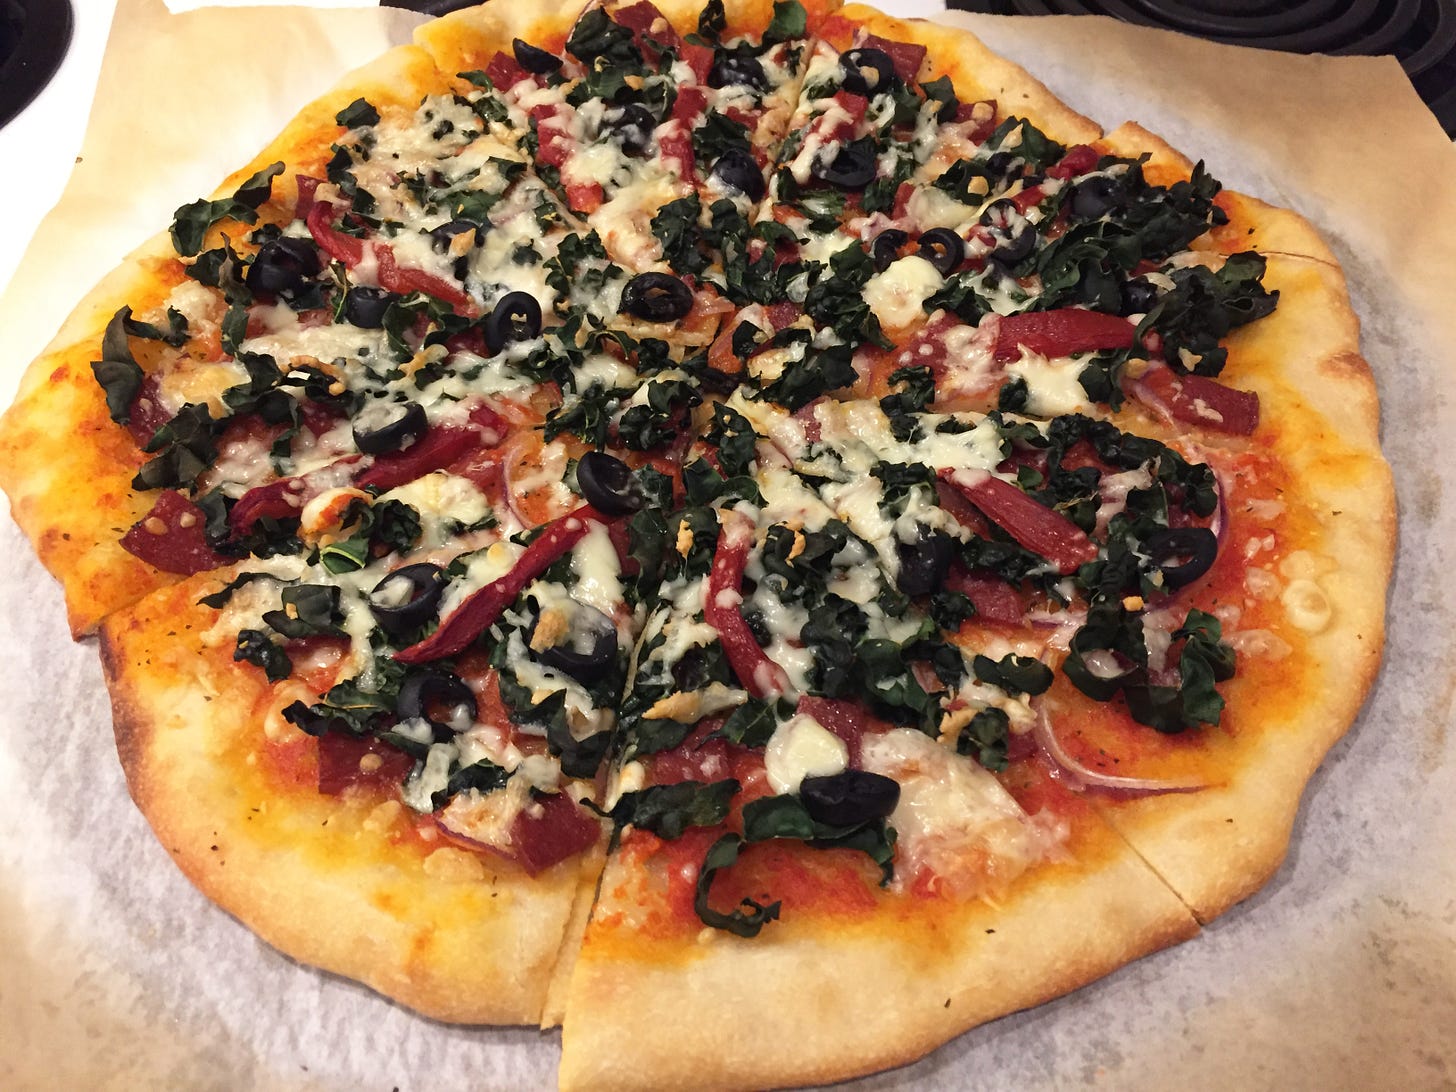 On parchment paper atop a pizza stone, a kale and olive pizza with browned edges and slices of roasted red pepper visible amid the cheese.